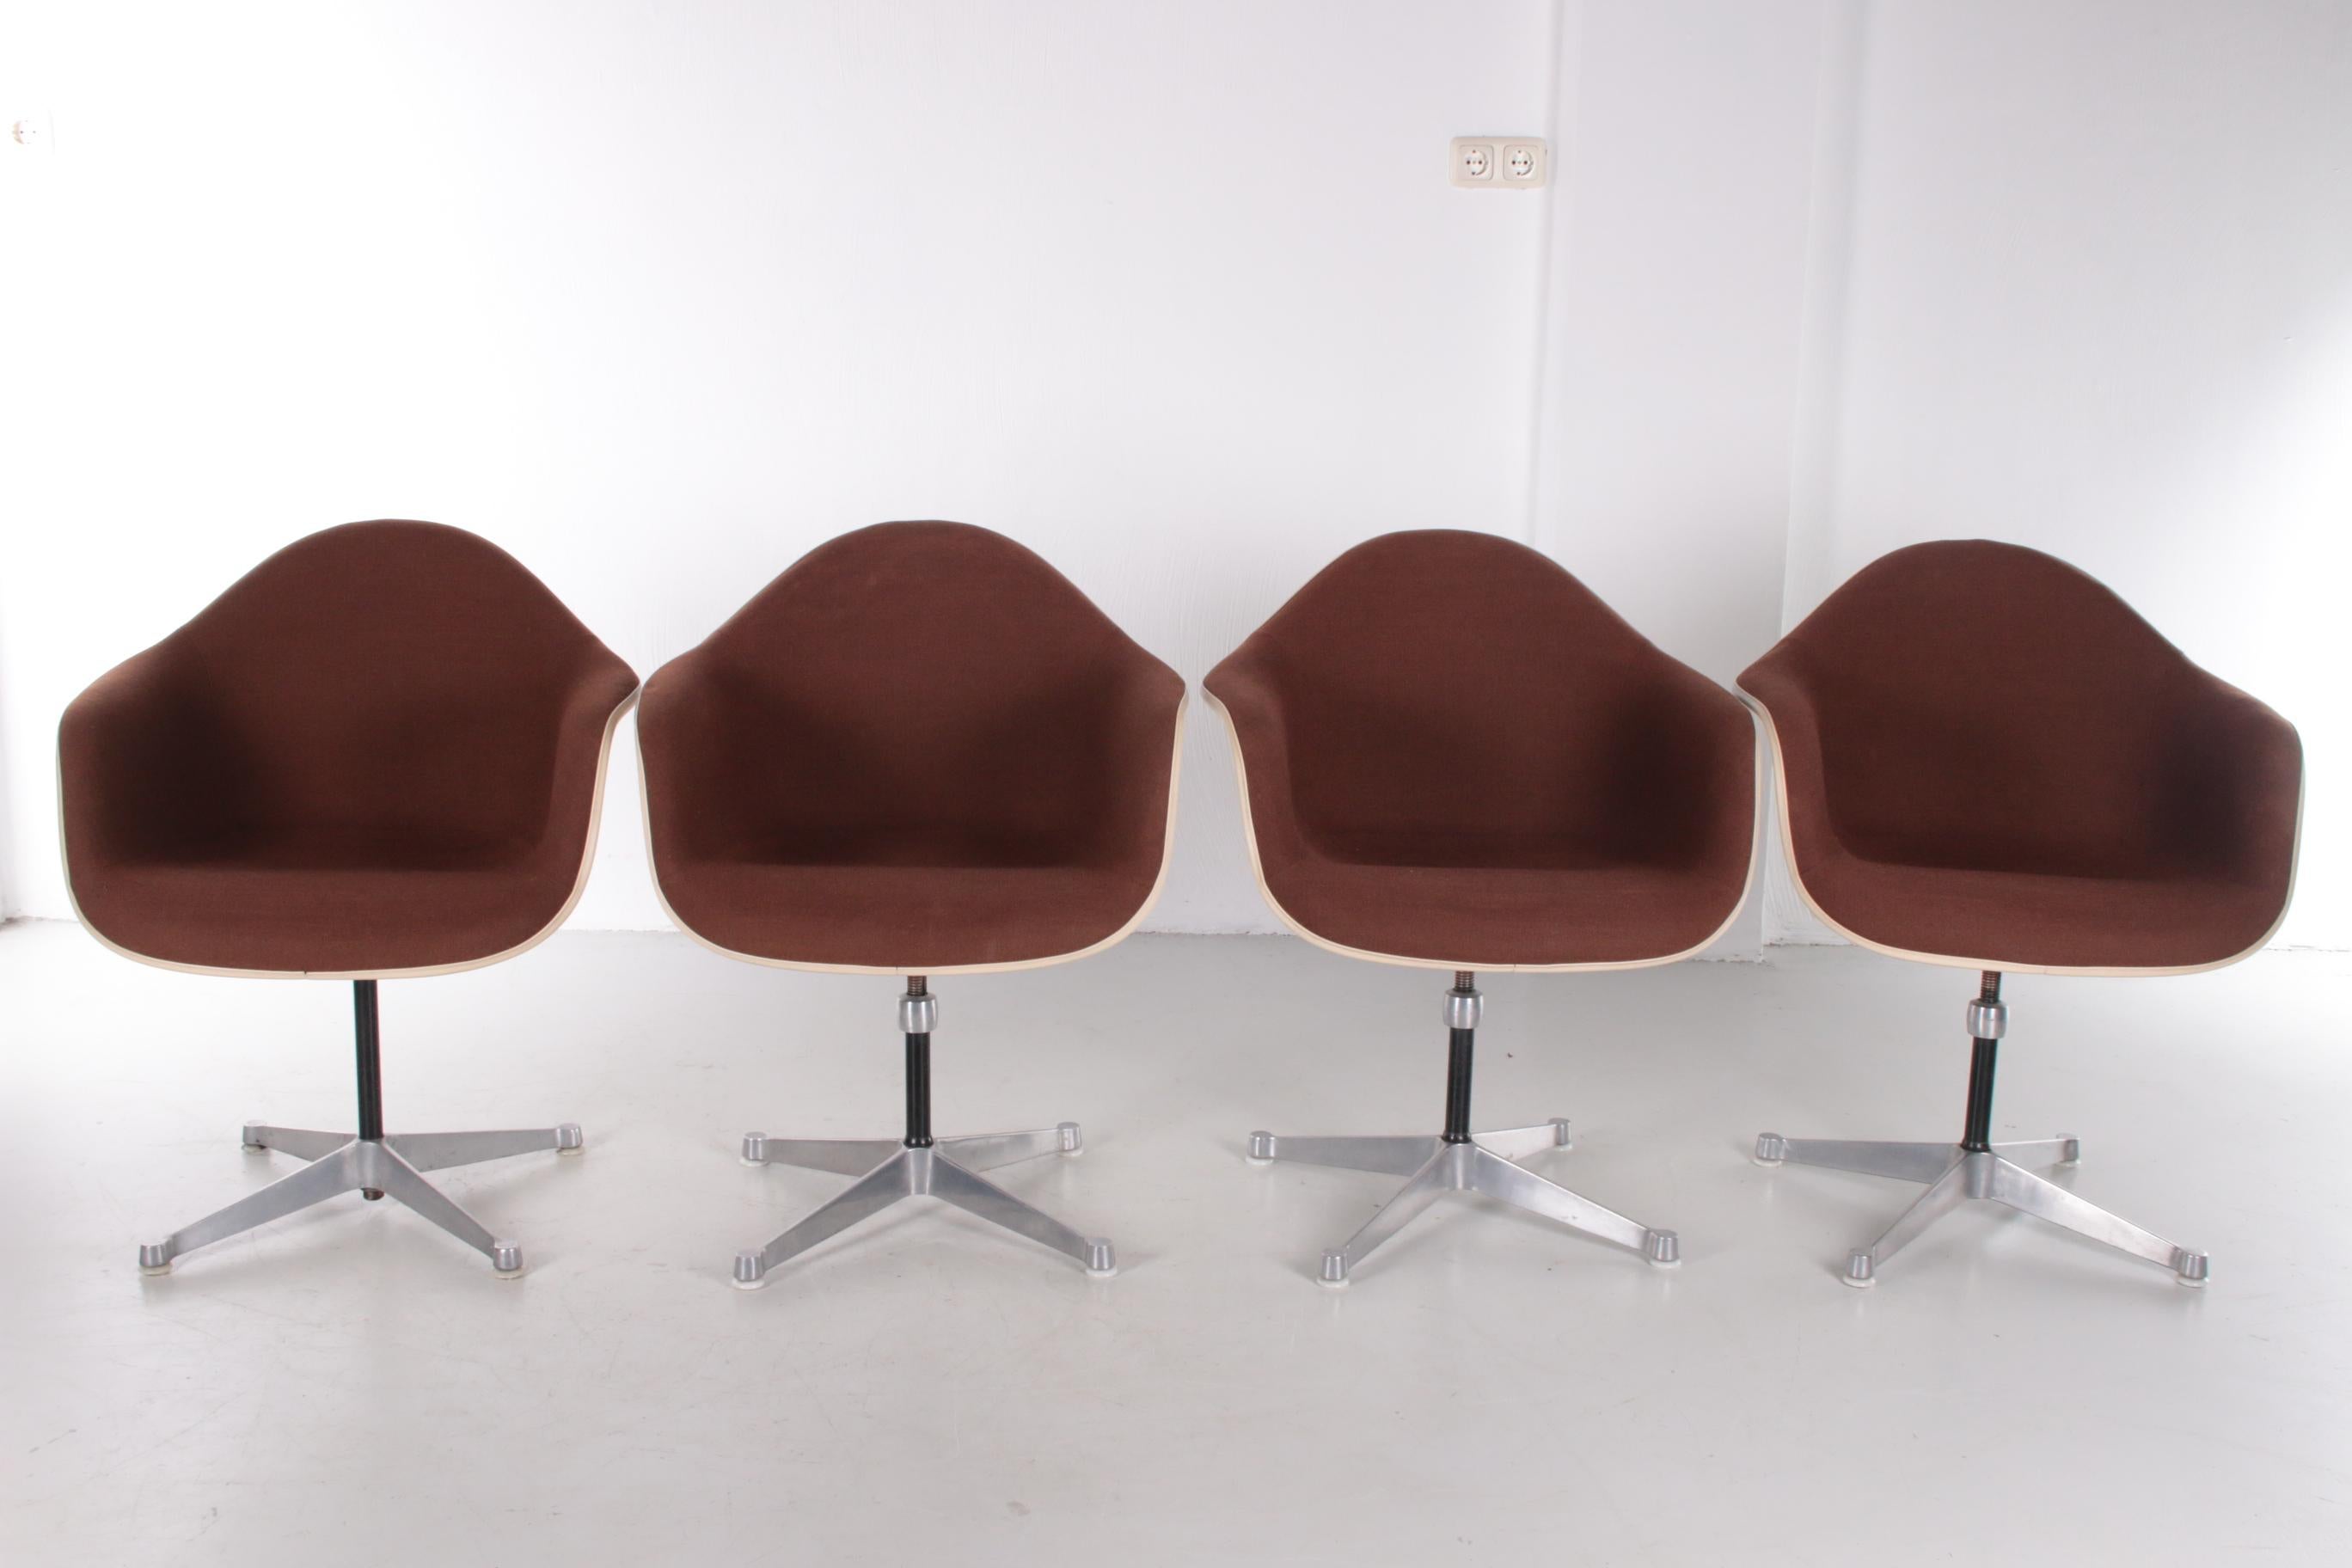 Late 20th Century Set of 4 DAX Chairs by Charles & Ray Eames for Herman Miller